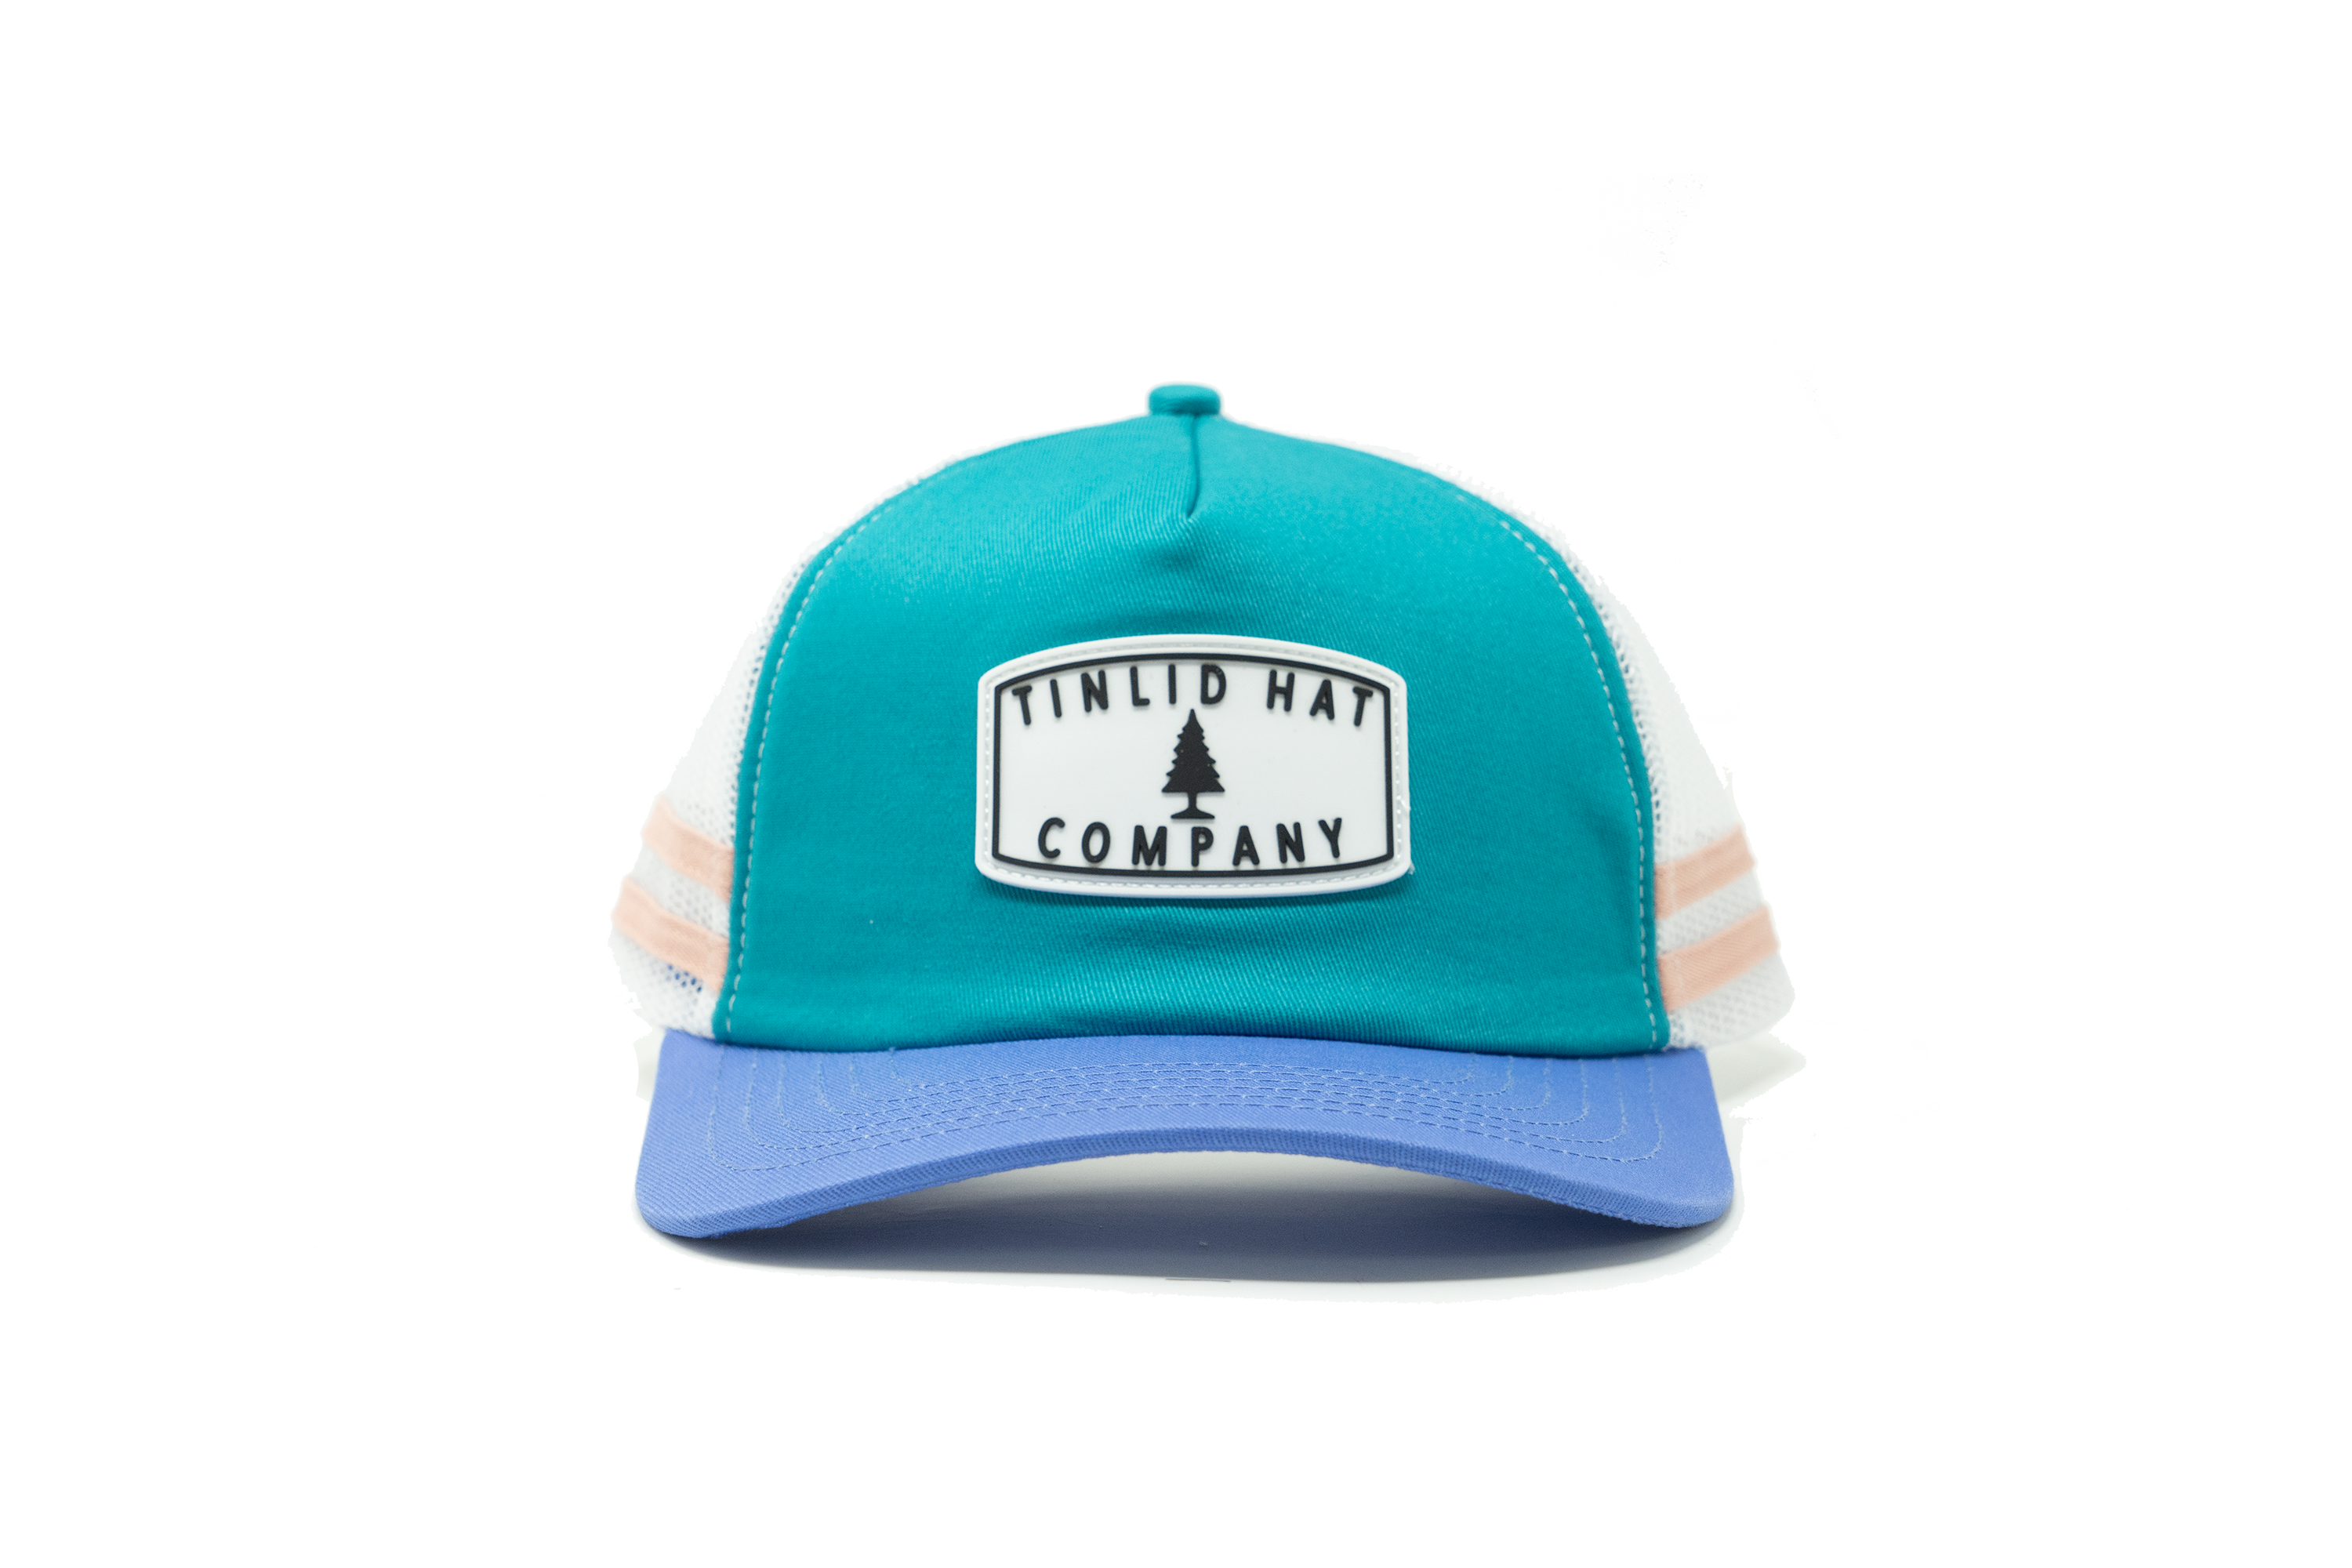 The Turquoise Thovex Trucker Hat